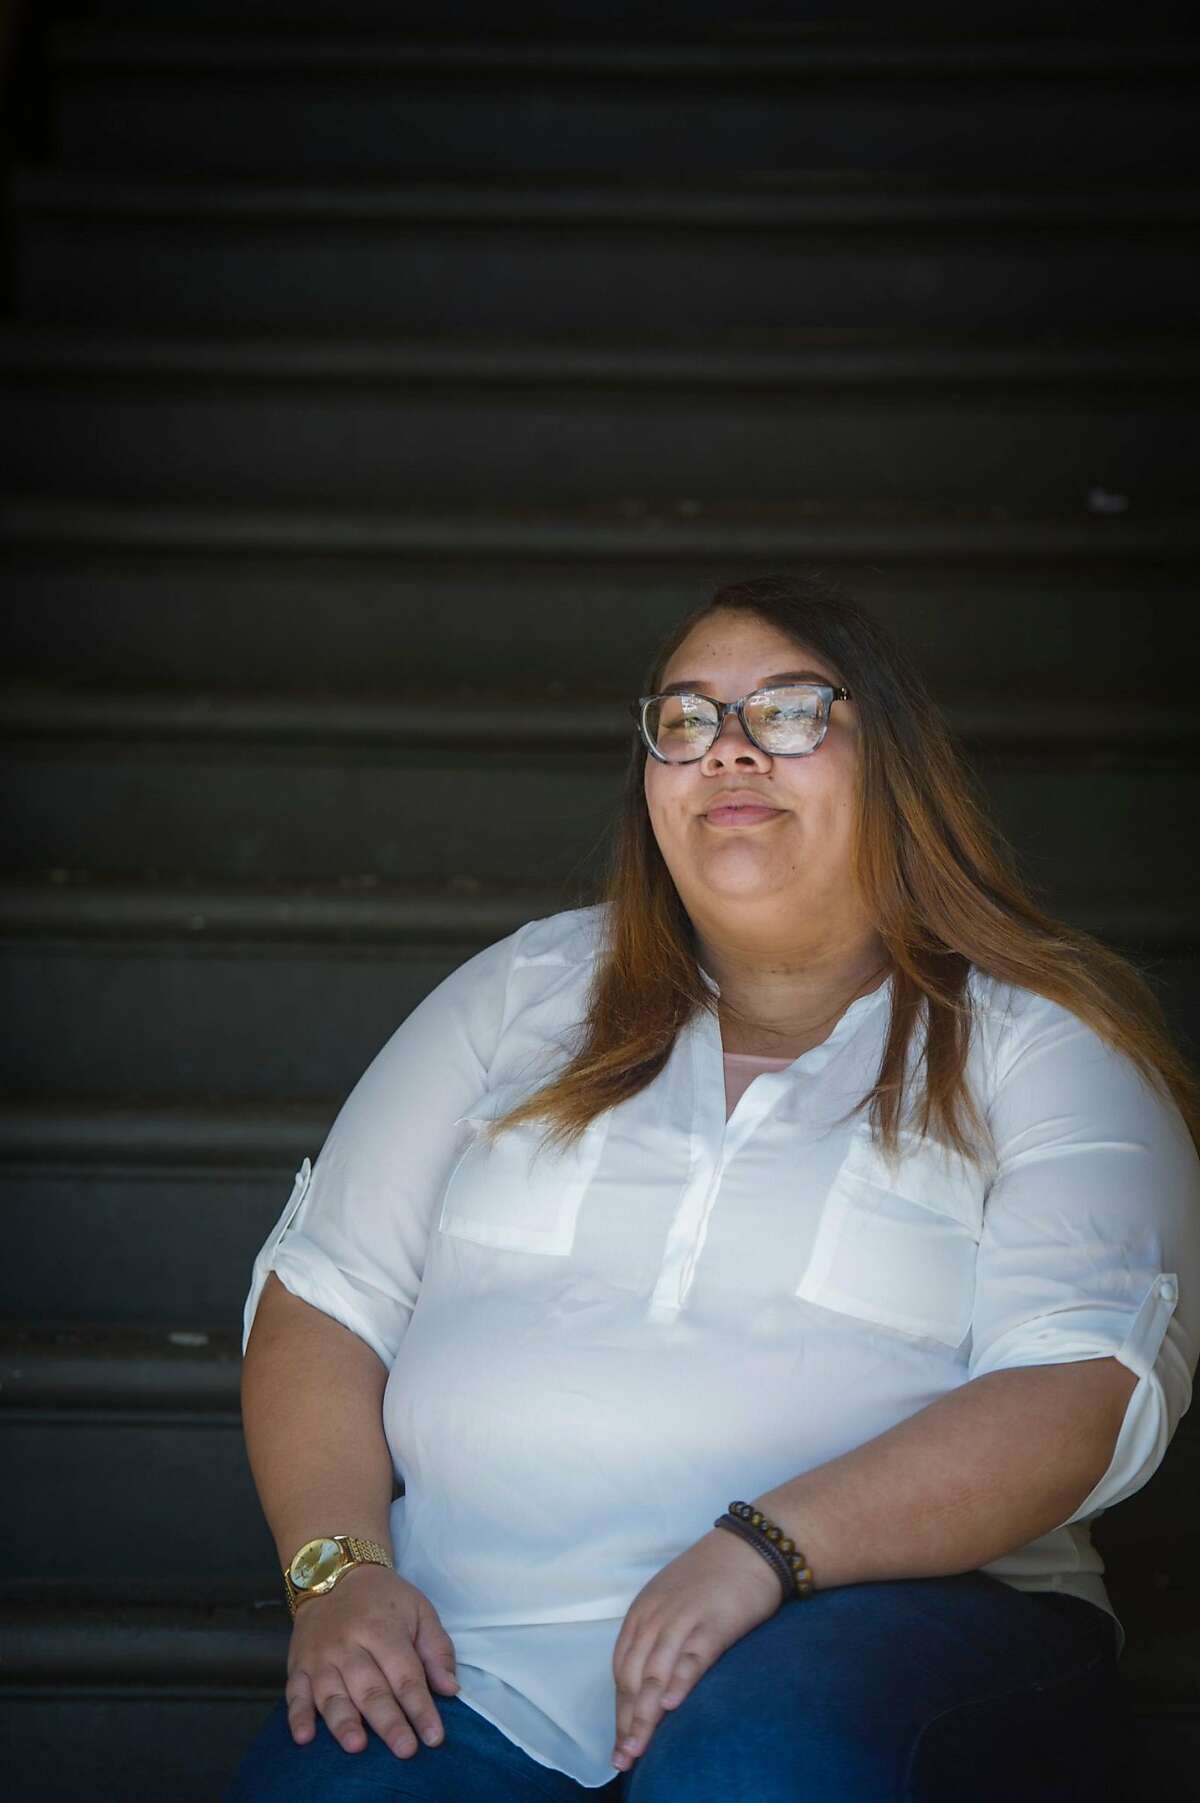 Aja Dunlap is Sacramento State student who is pregnant and recently transitioned out of the foster care system. Photographed at her home in Sacramento, Calif. on Thursday, April 30, 2020.